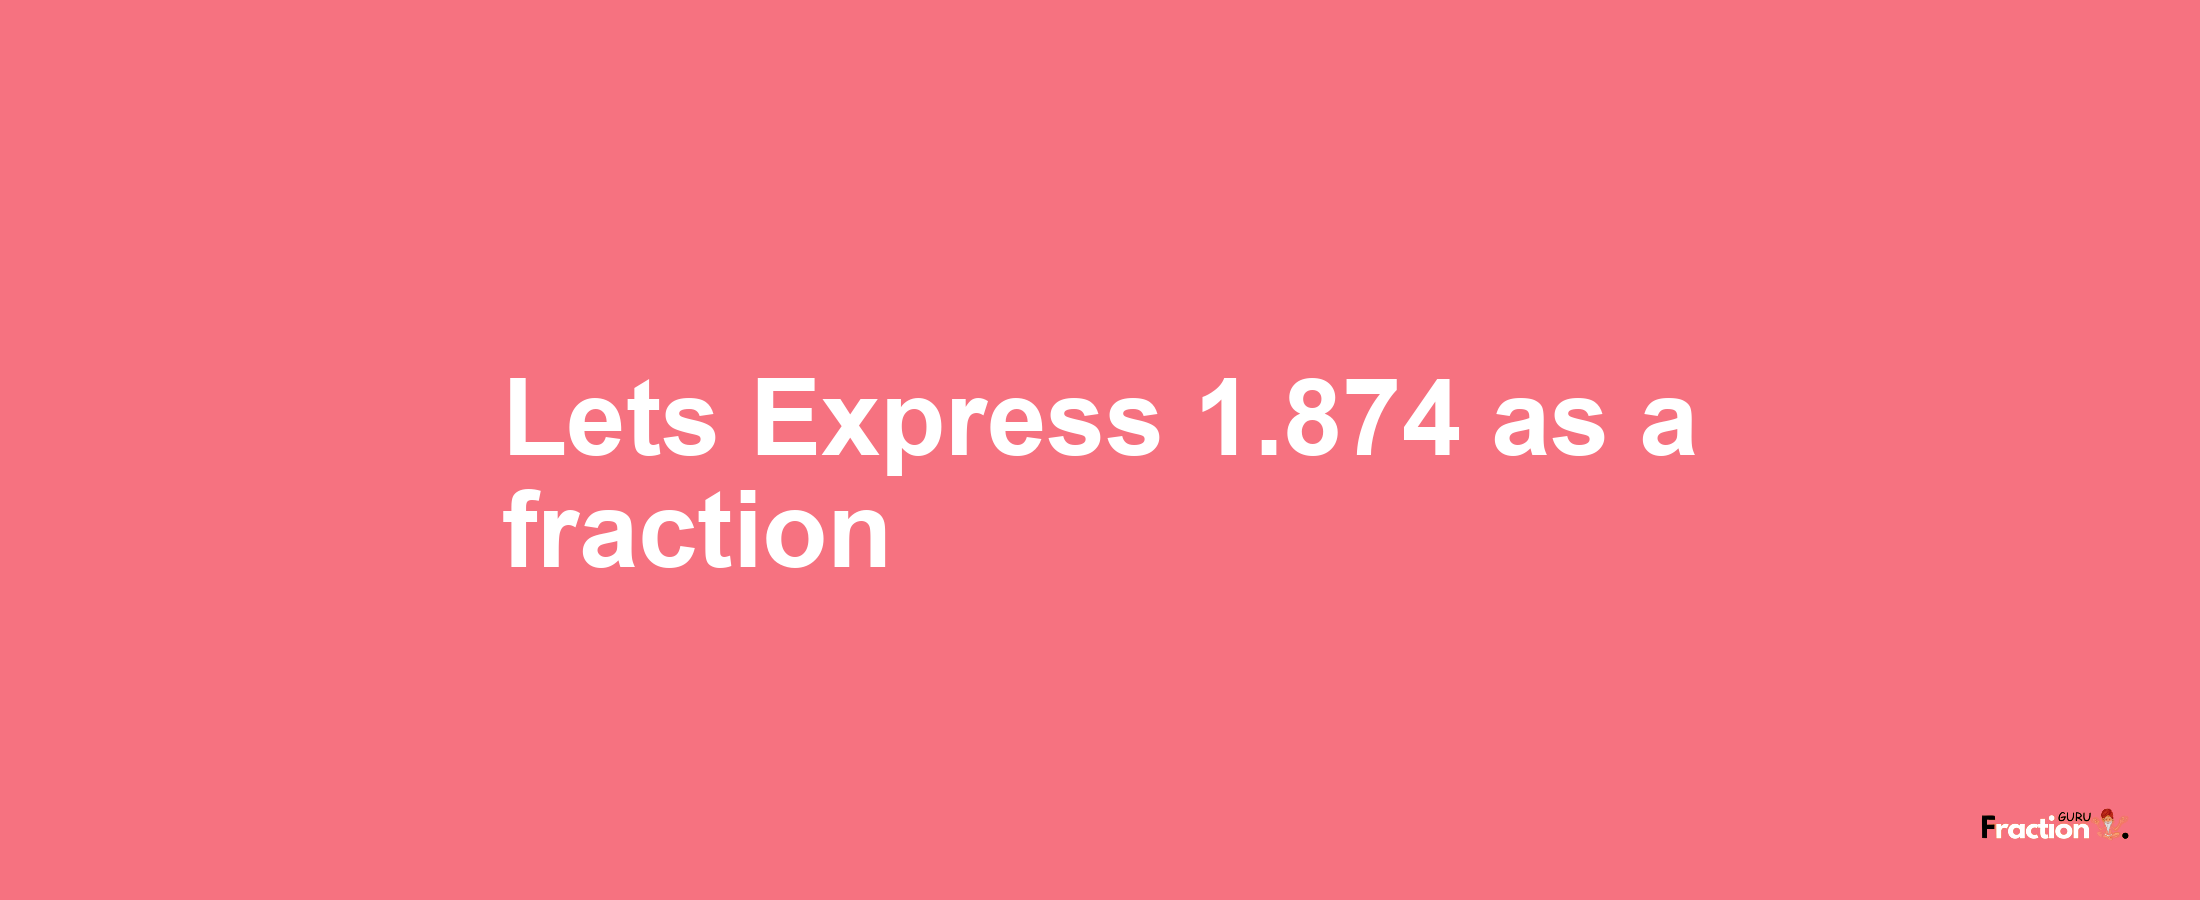 Lets Express 1.874 as afraction